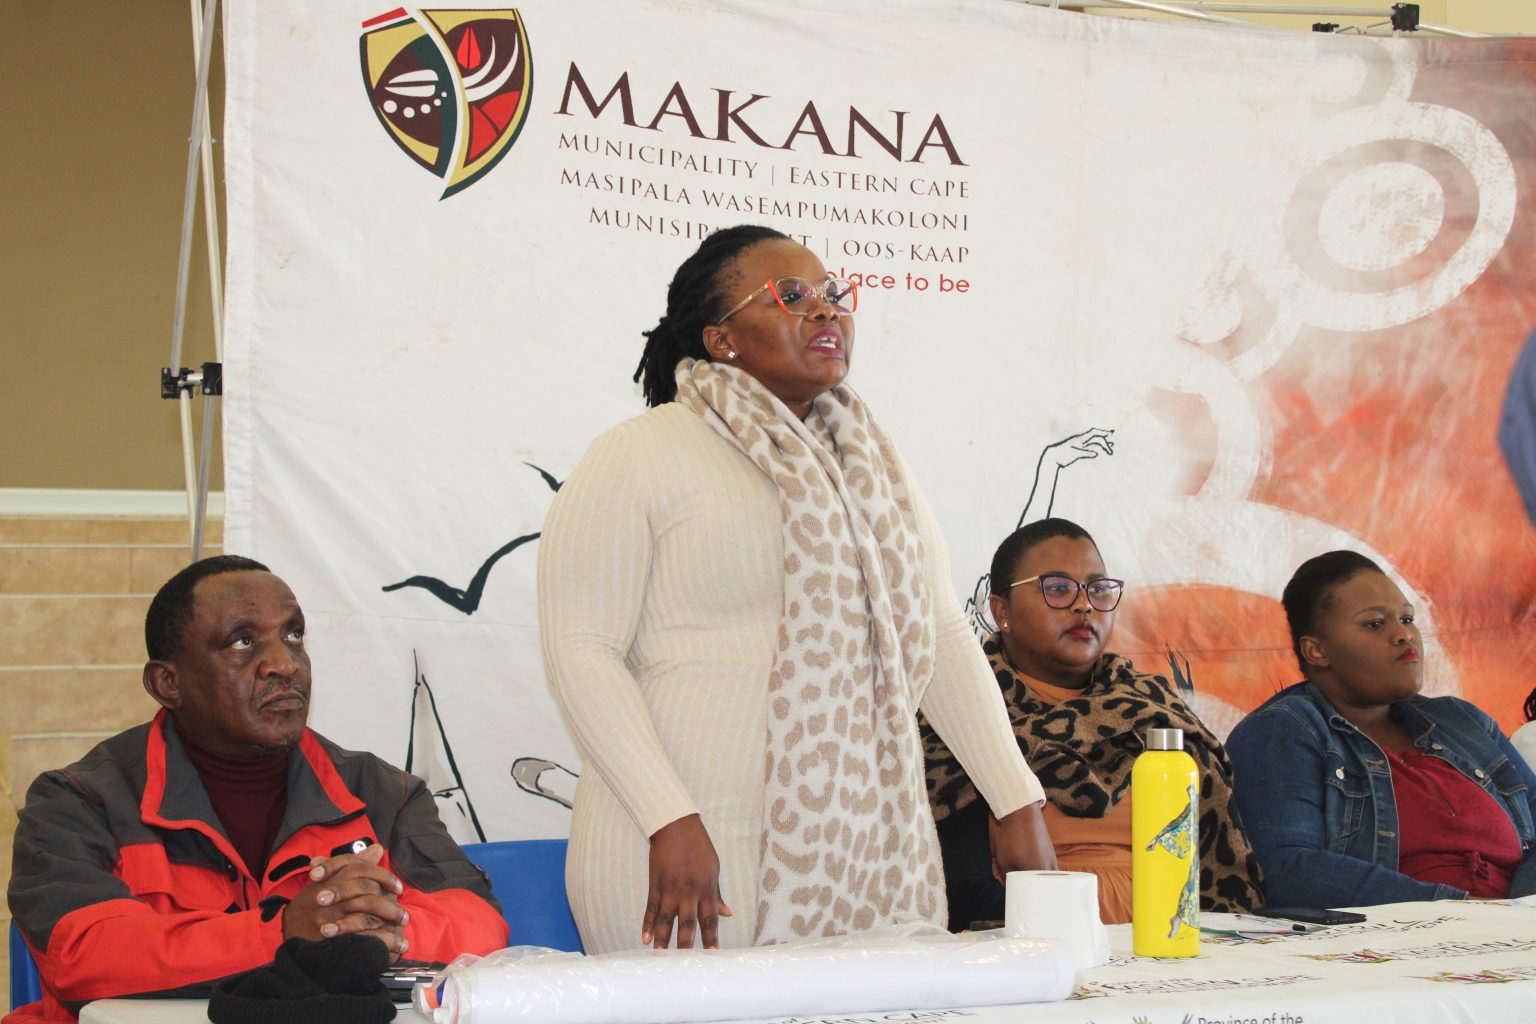 Makana mayor Yandiswa Vara (standing), addresses the youth during the Youth Month event held at the Extension 9 community hall this week. Photo: Anita Mvane